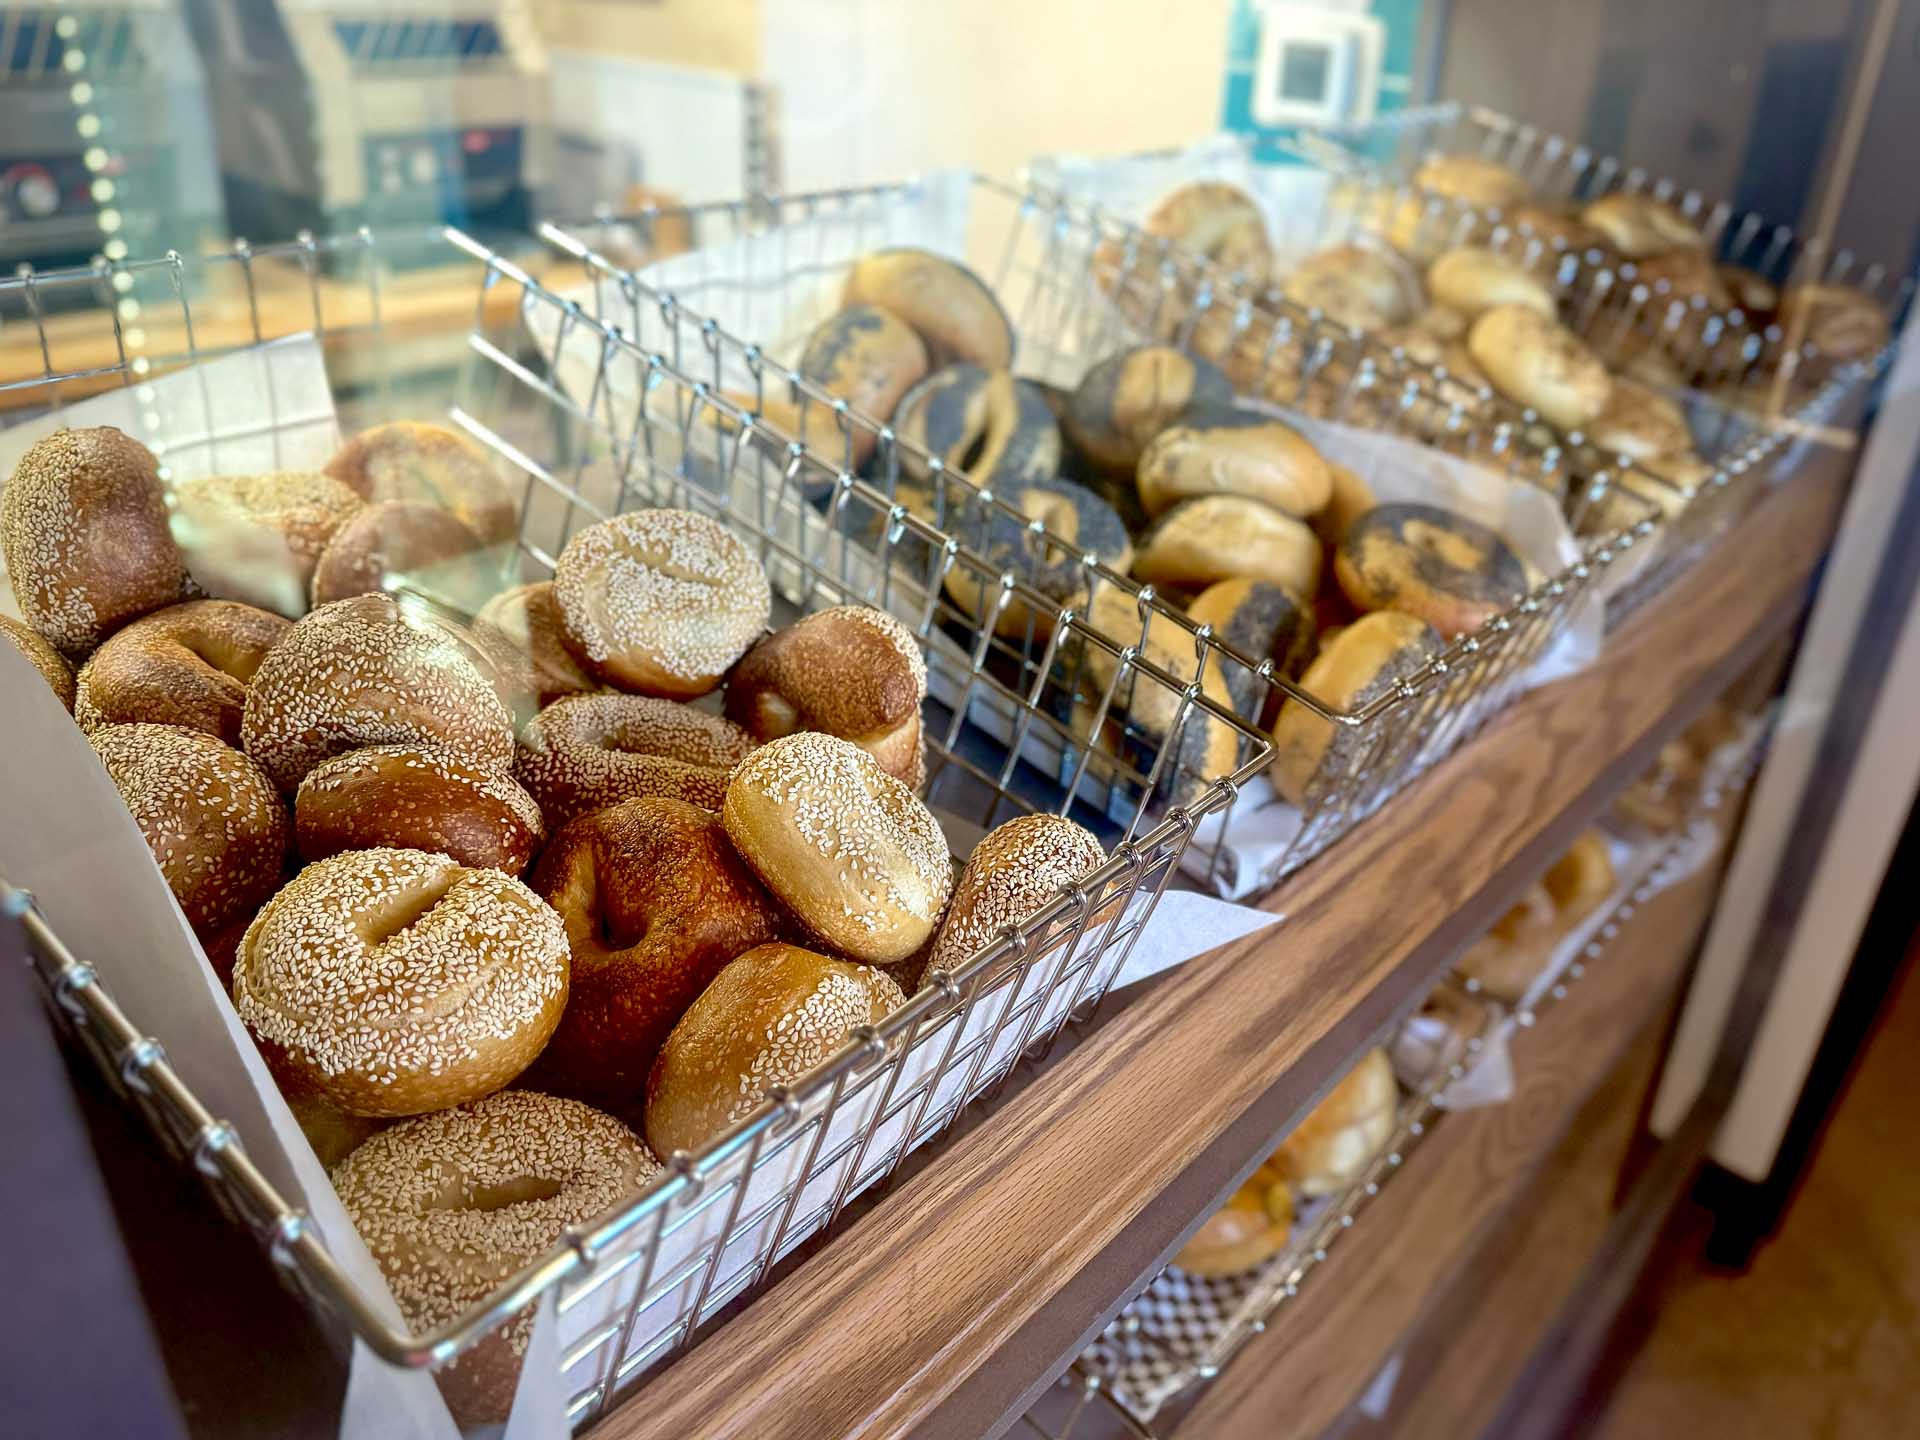 Our selection of bagel flavors at Fat Bagels in Flagstaff.